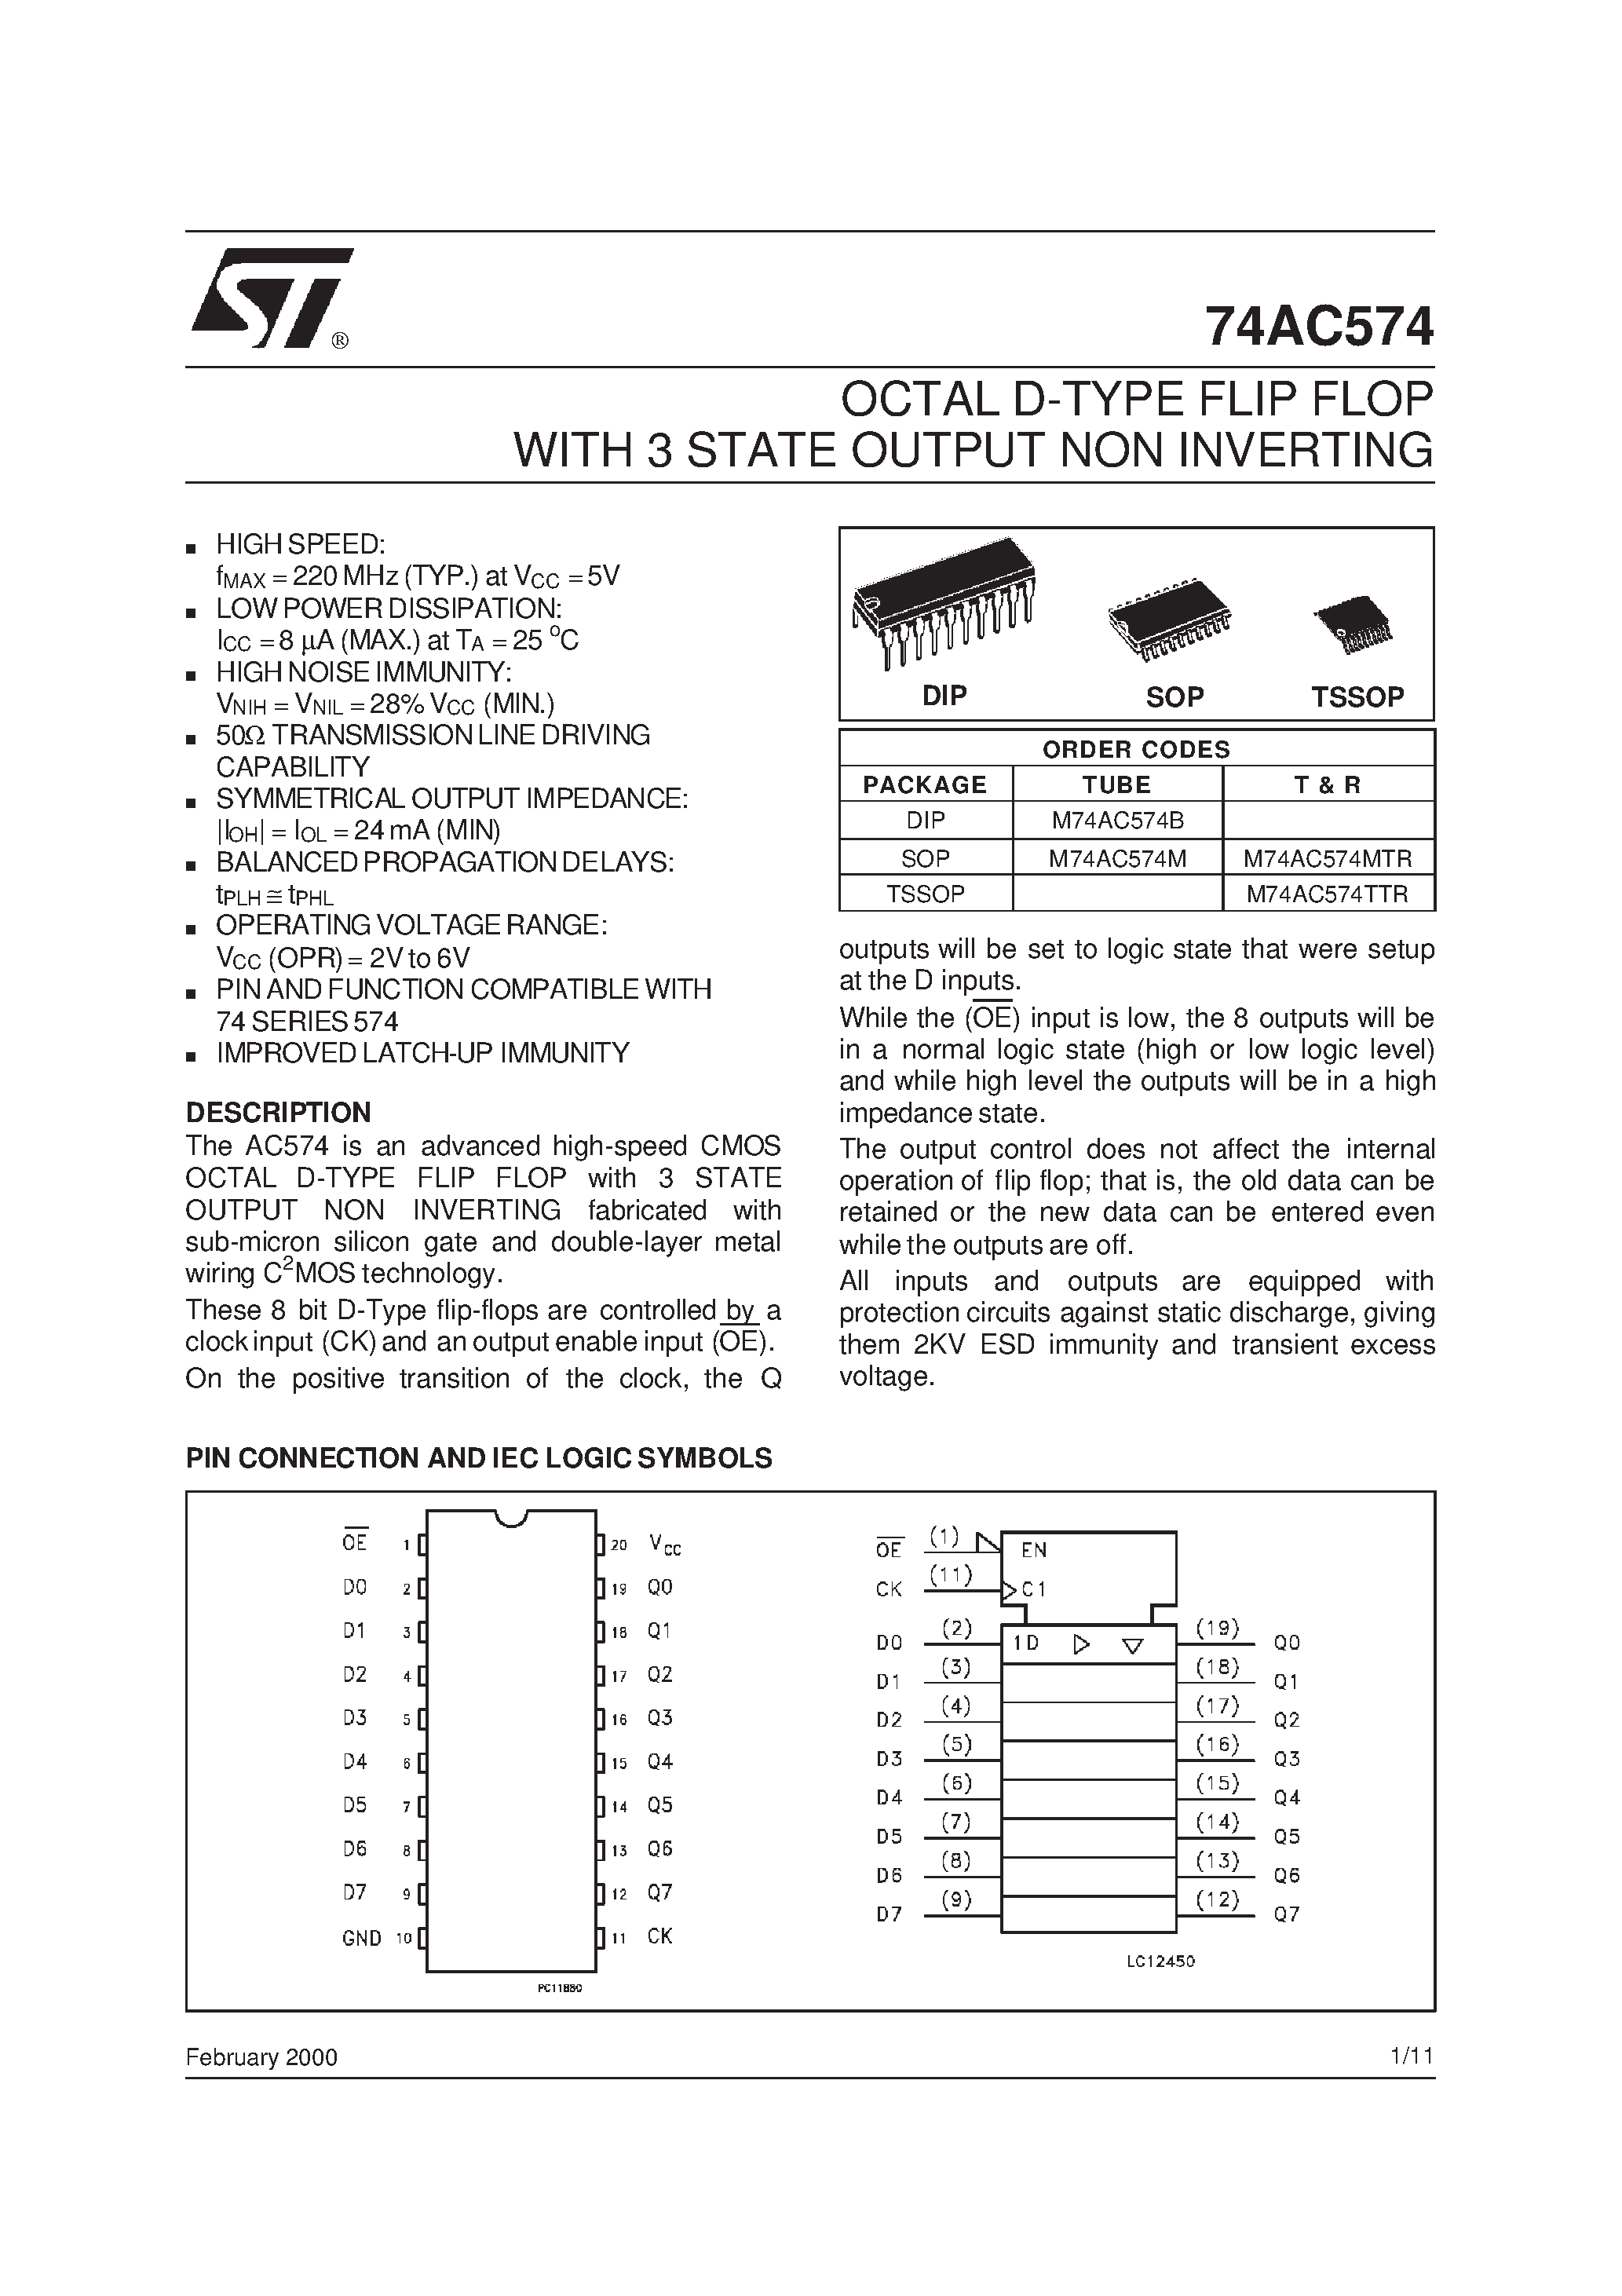 Datasheet M74AC574M - OCTAL D-TYPE FLIP FLOP WITH 3 STATE OUTPUT NON INVERTING page 1